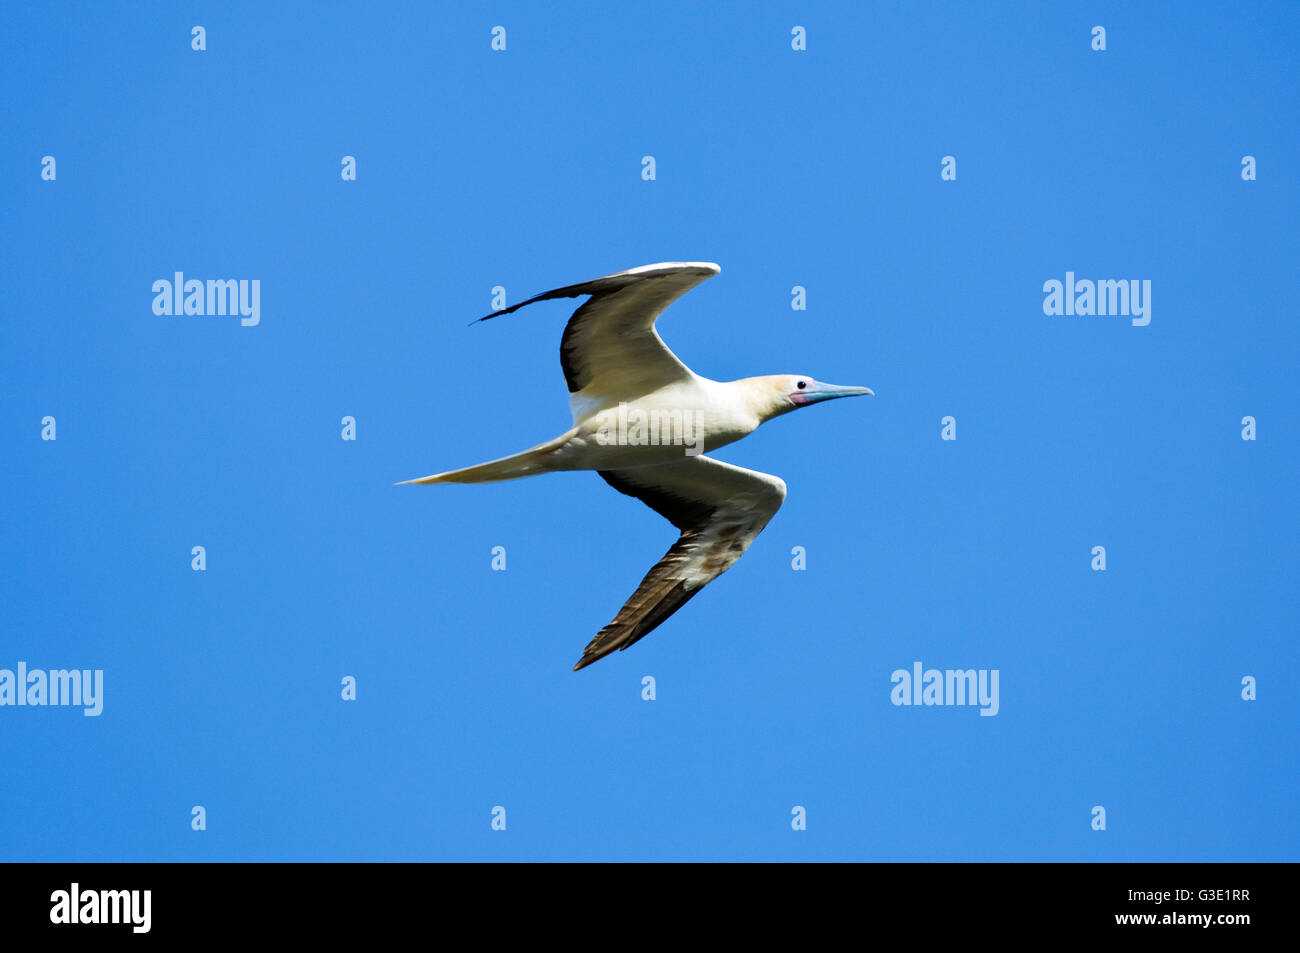 A red-footed booby (Sula sula), white morph, in flight. Christmas Island, Australia. Stock Photo